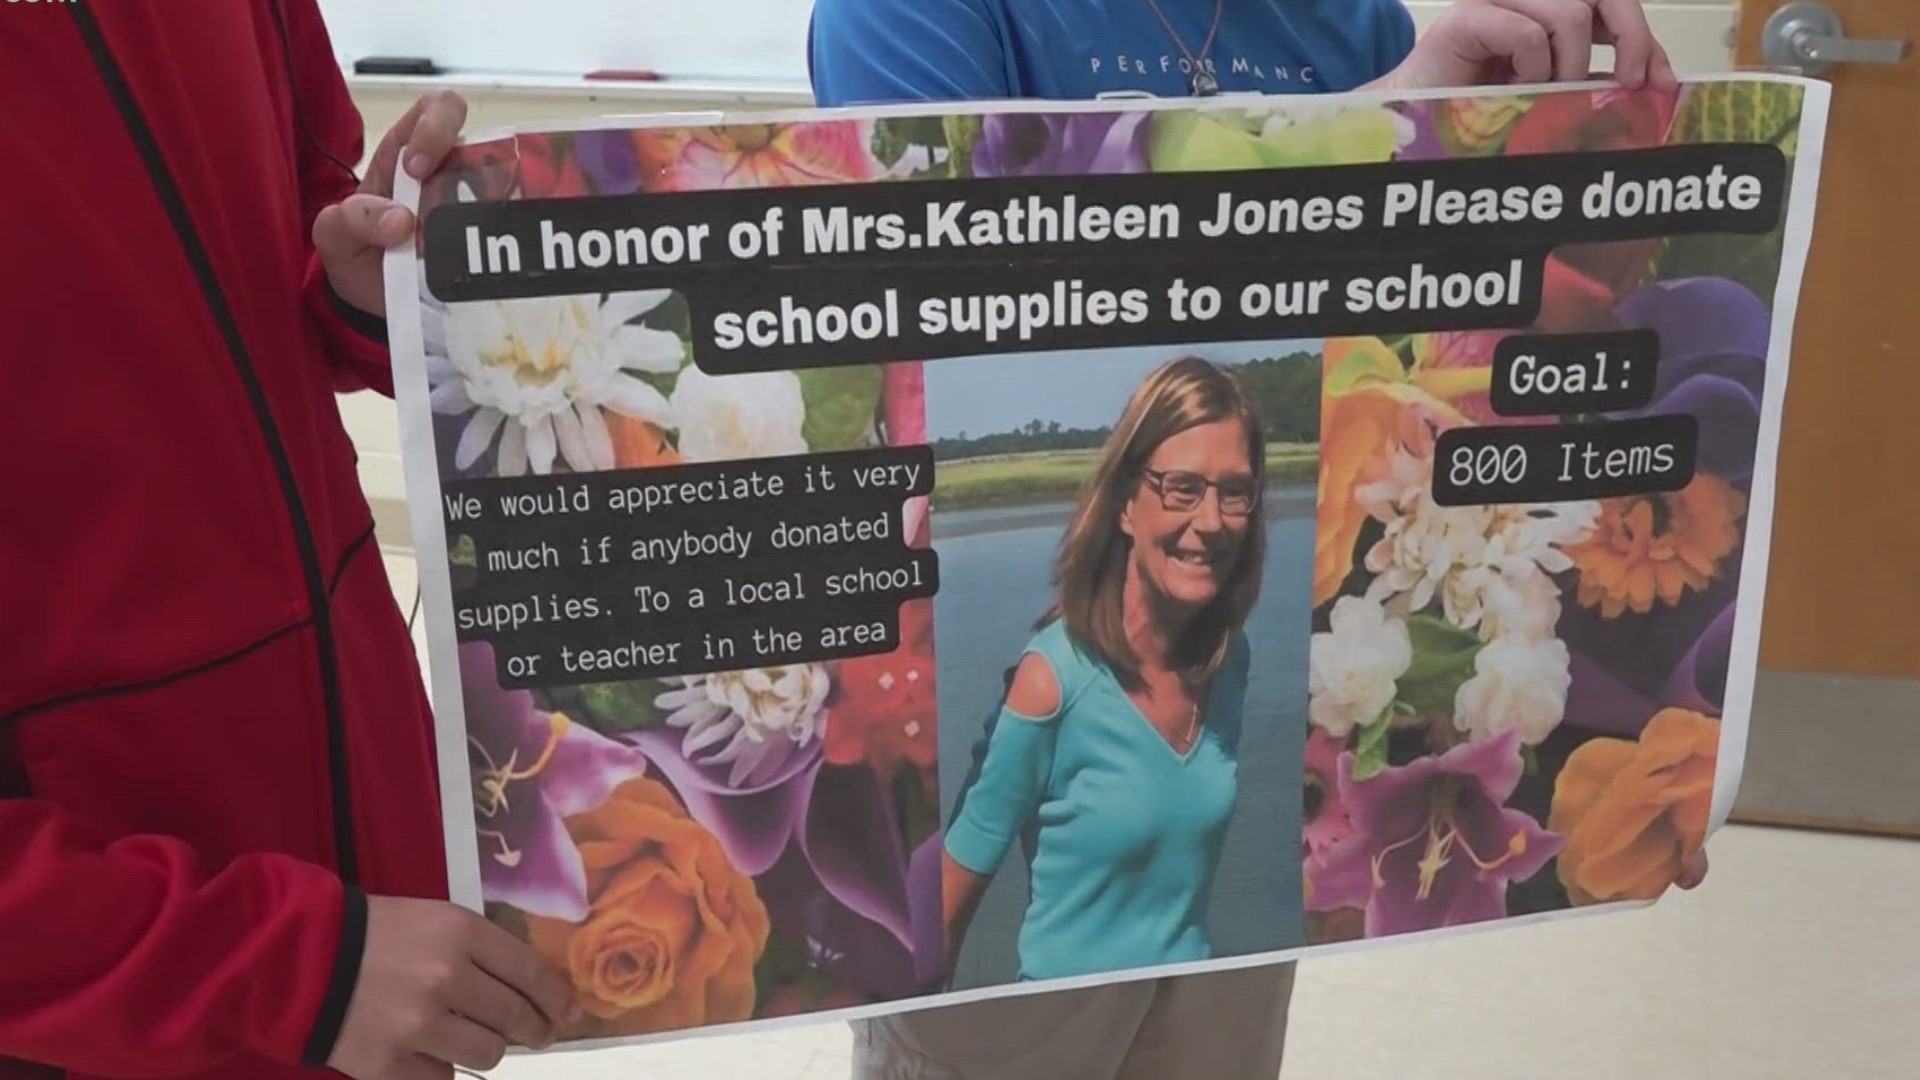 All to remember teacher Kathleen Jones she retired and passed away recently.